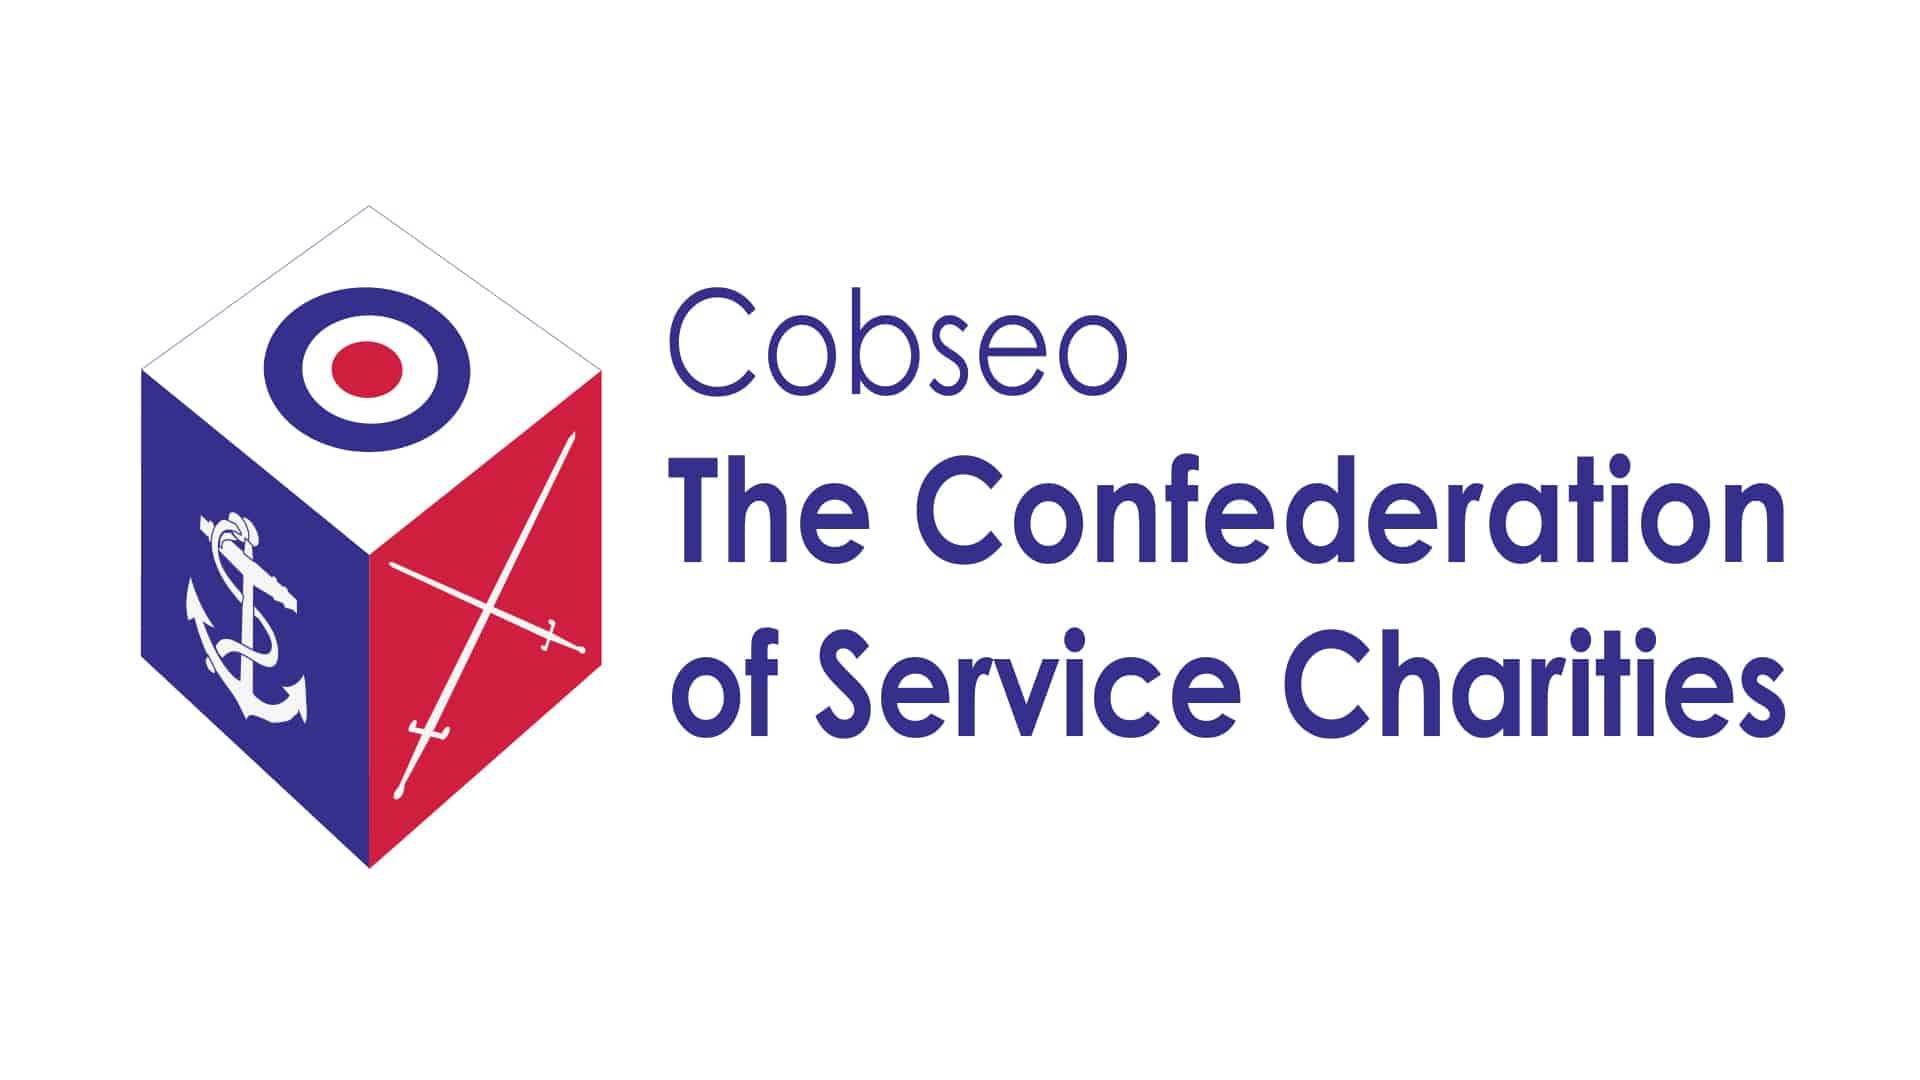 Cobseo, Confederation of Service Charities logo